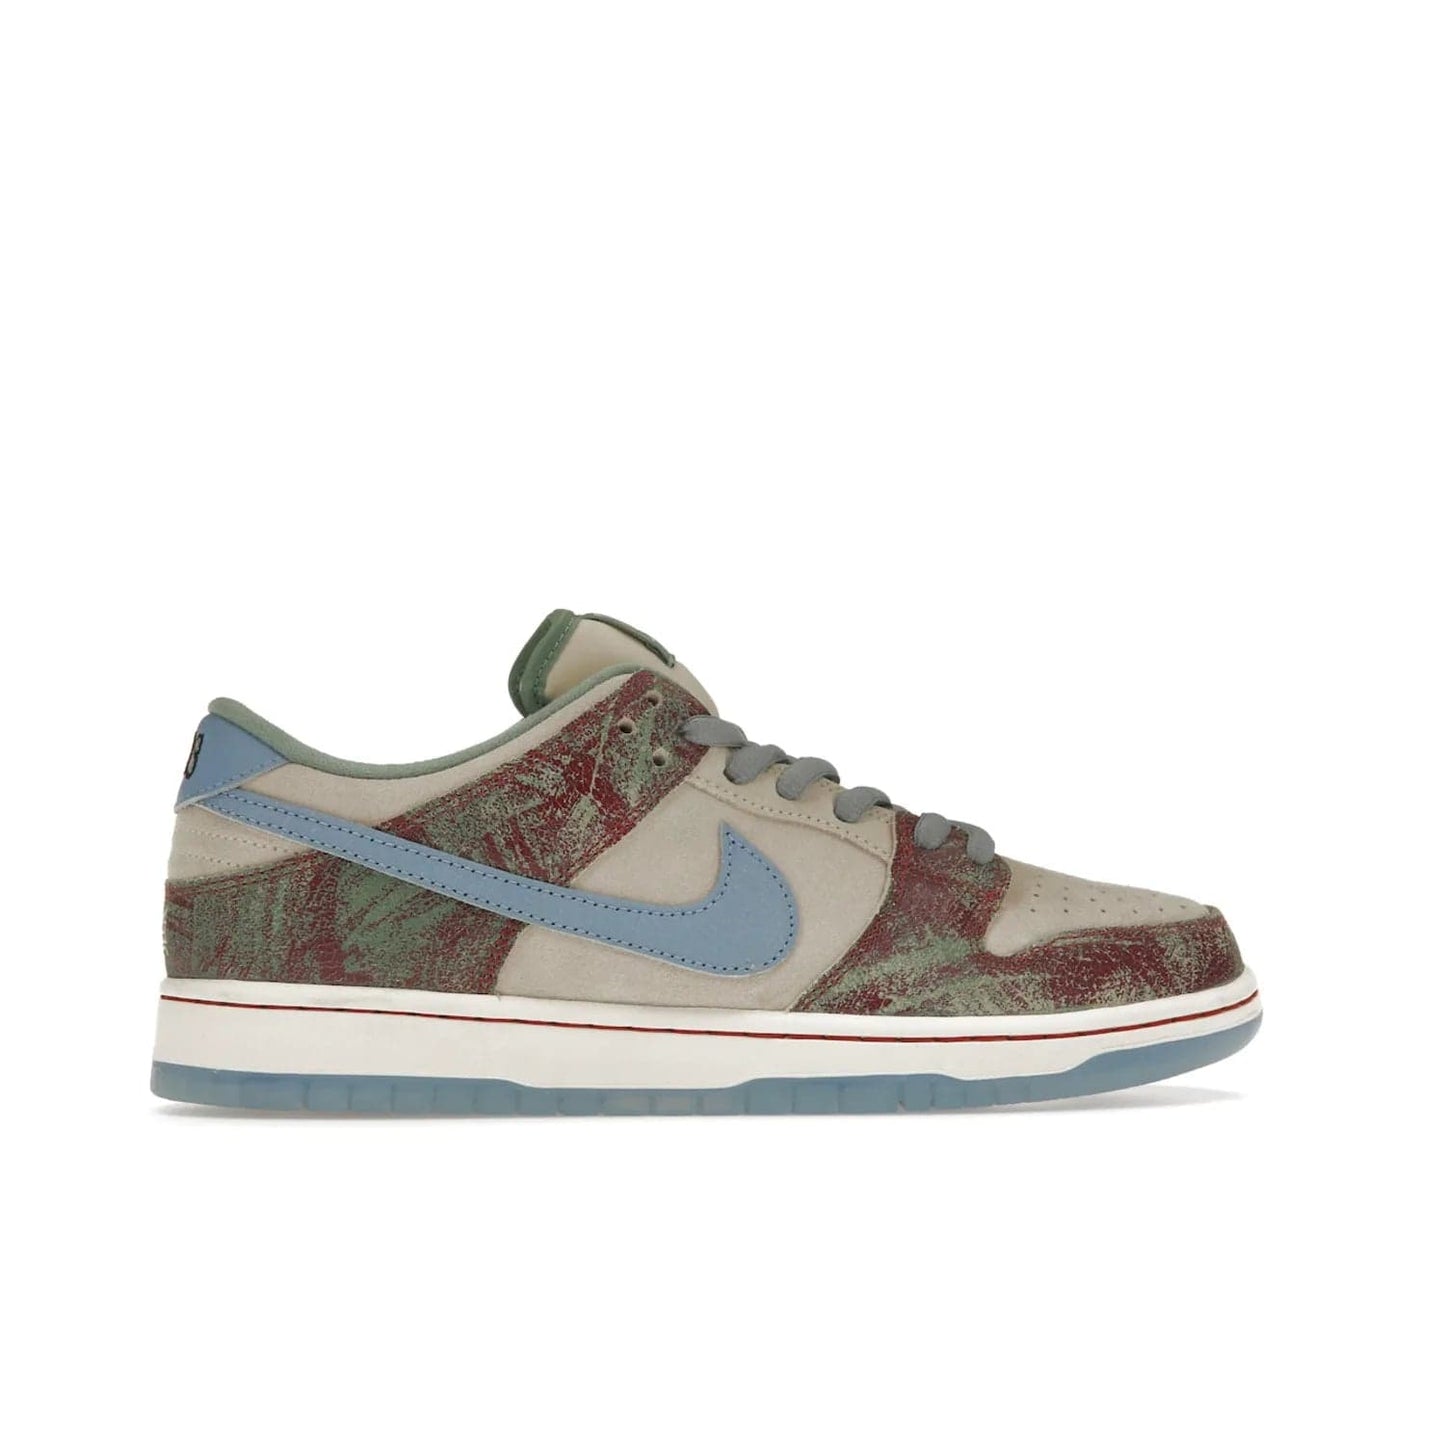 Nike SB Dunk Low Crenshaw Skate Club - Image 36 - Only at www.BallersClubKickz.com - Introducing the Nike SB Dunk Low Crenshaw Skate Club! Classic skate shoes with Sail and Light Blue upper, Cedar accents, padded collars and superior grip for comfortable, stable performance and style. Ideal for any skate session.